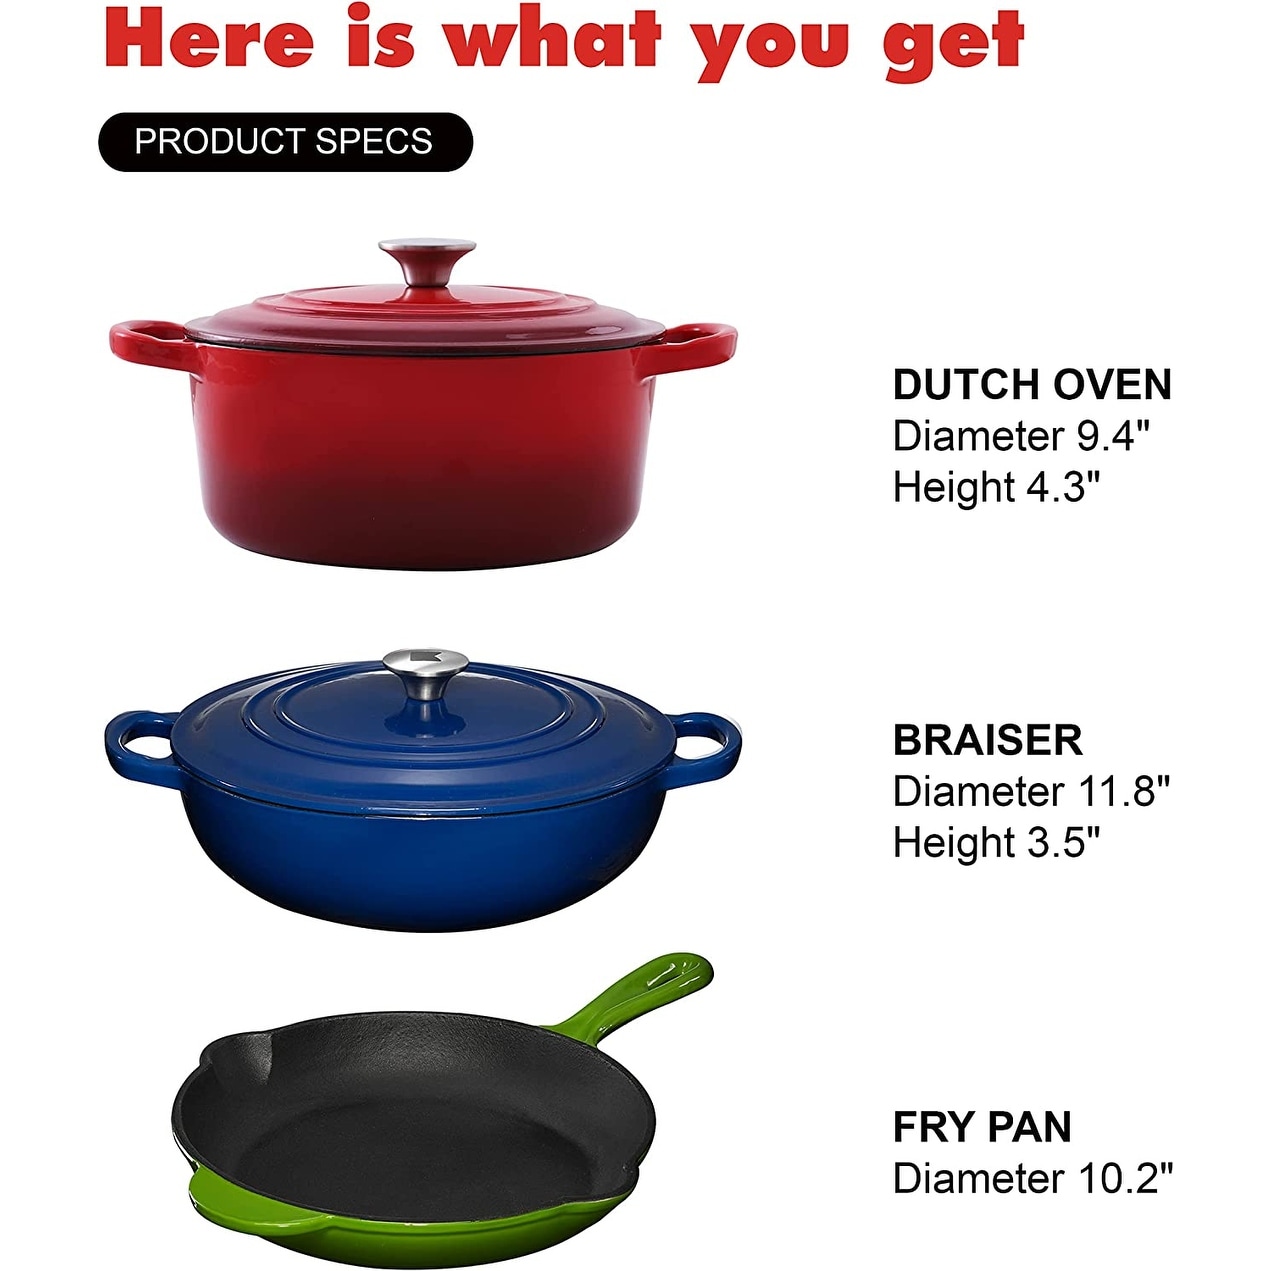 https://ak1.ostkcdn.com/images/products/is/images/direct/7f51f90e4f6feeda5313ad6deeca053f3c7715fa/Enameled-Cast-Iron-Cookware-Set---5-Pieces-Solid-Colored-Braiser-Dish%2C-Fry-Pan%3B-Dutch-Oven-Pot-with-Lids.jpg